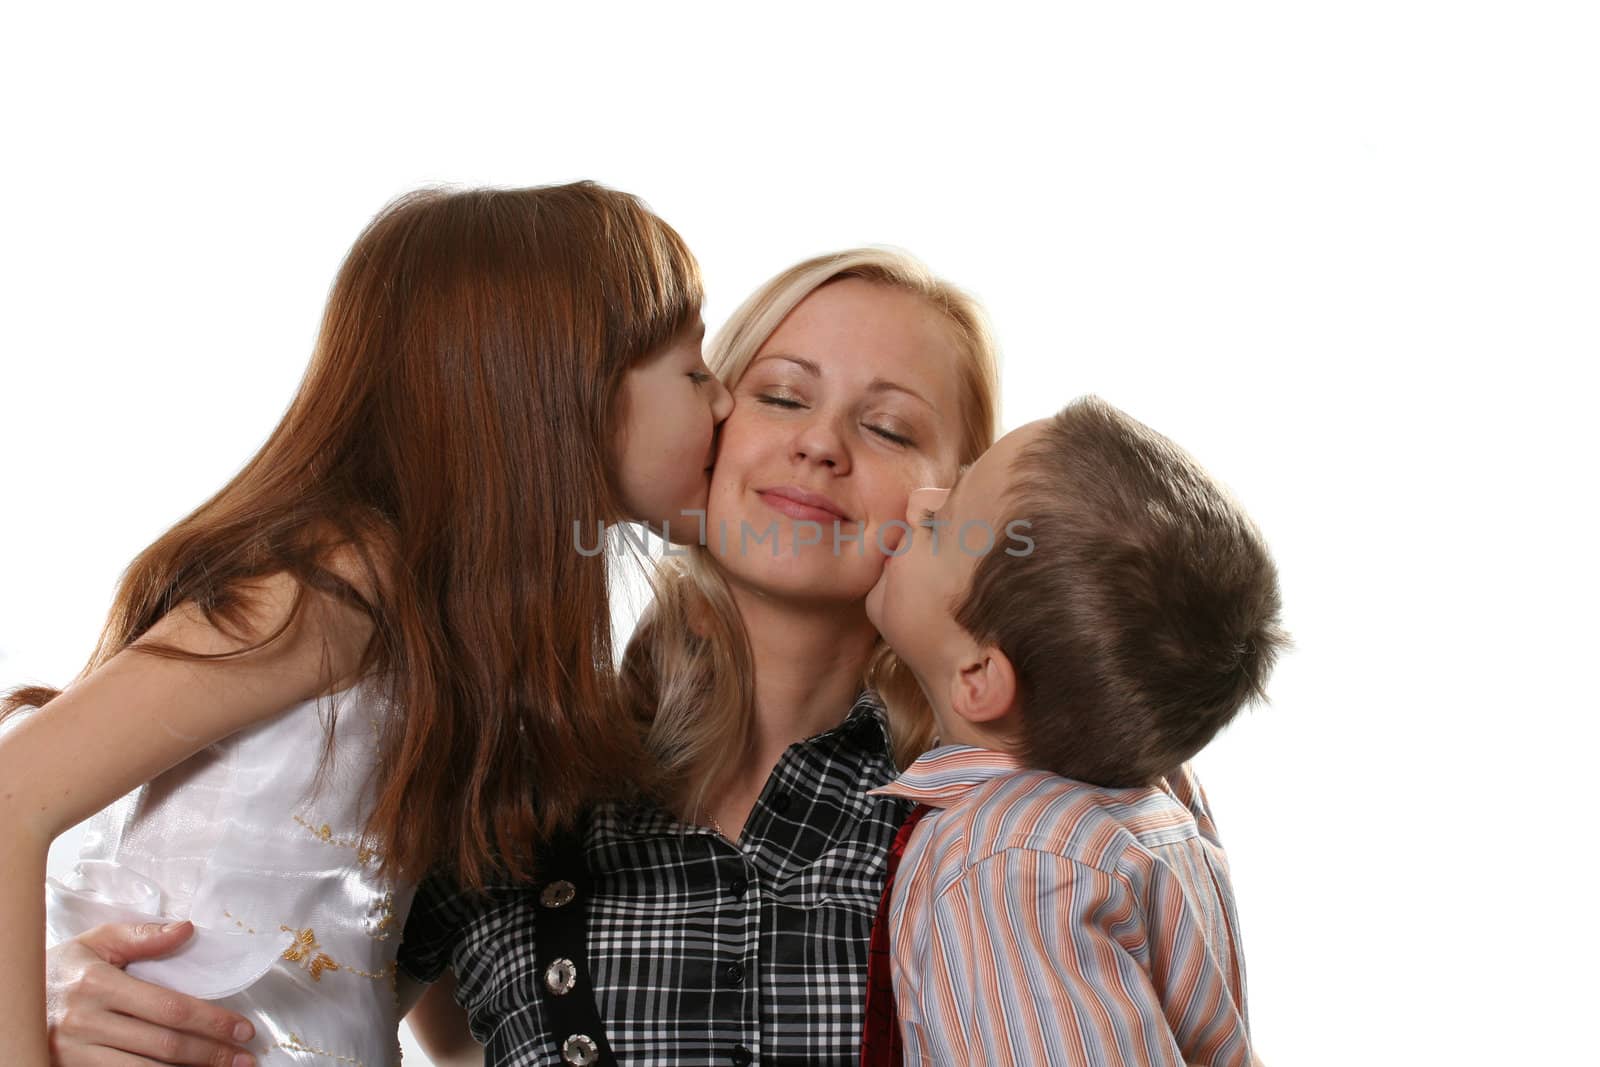 Children kiss happy young mum on a white background